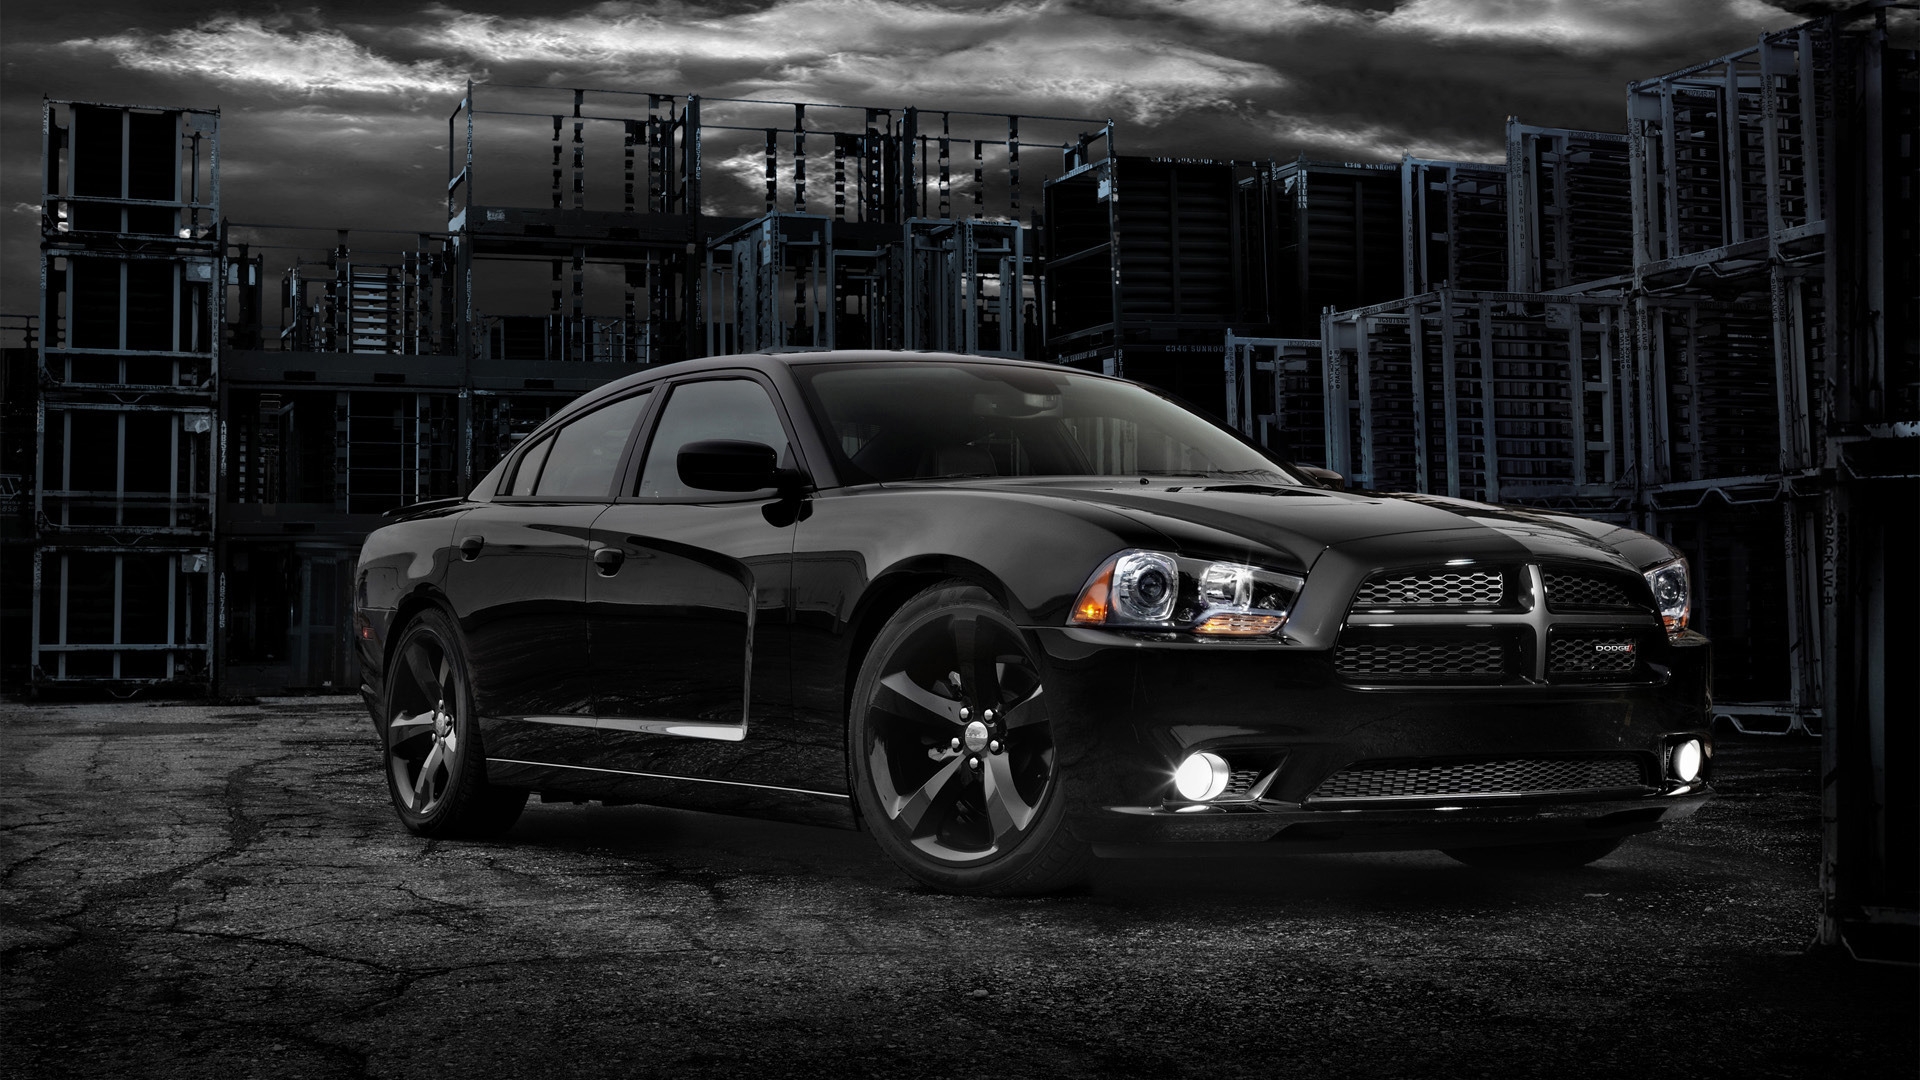 2012 Dodge Charger Blacktop for 1920 x 1080 HDTV 1080p resolution